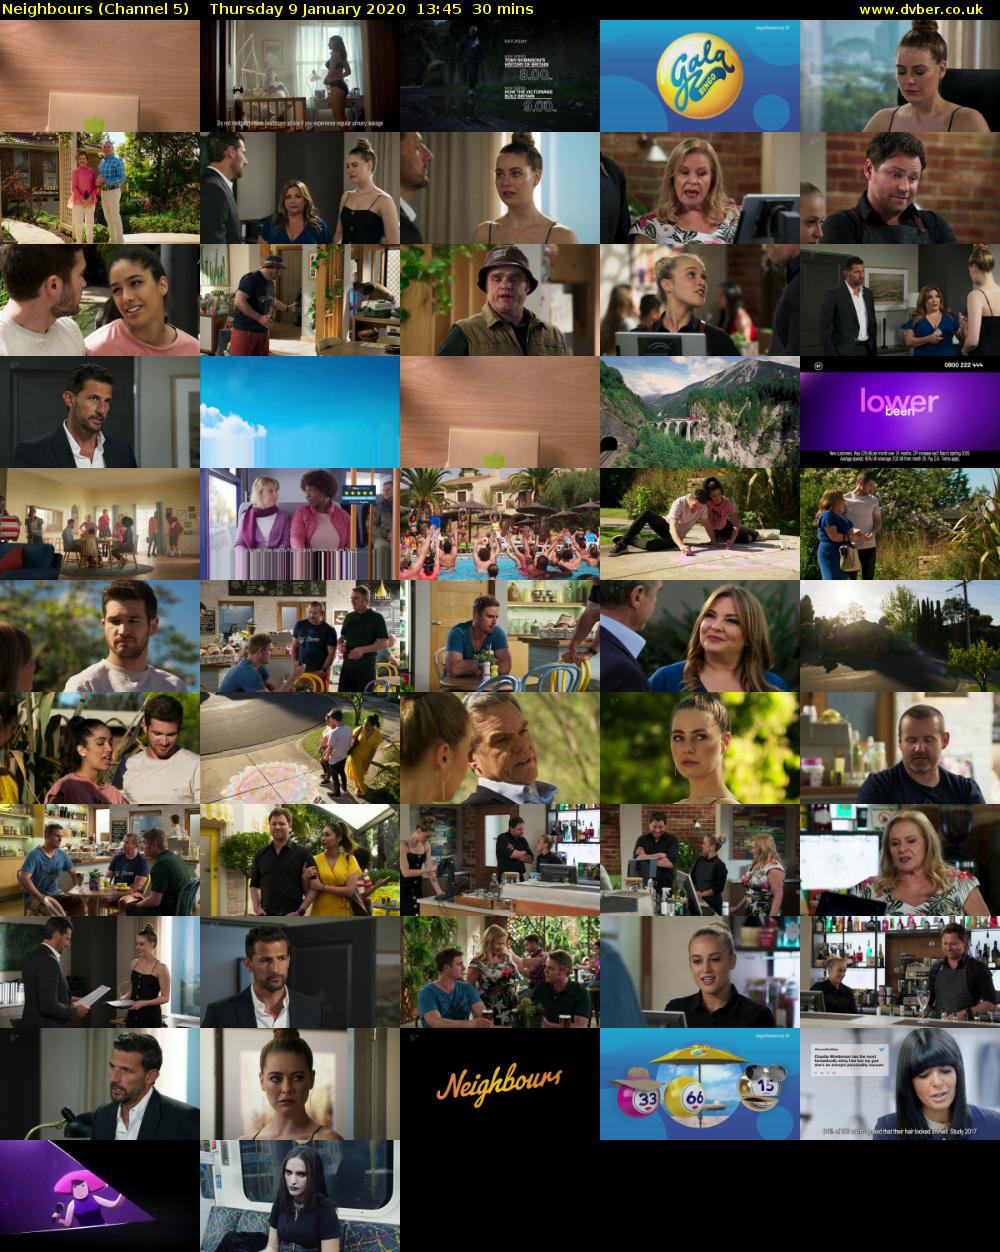 Neighbours (Channel 5) Thursday 9 January 2020 13:45 - 14:15